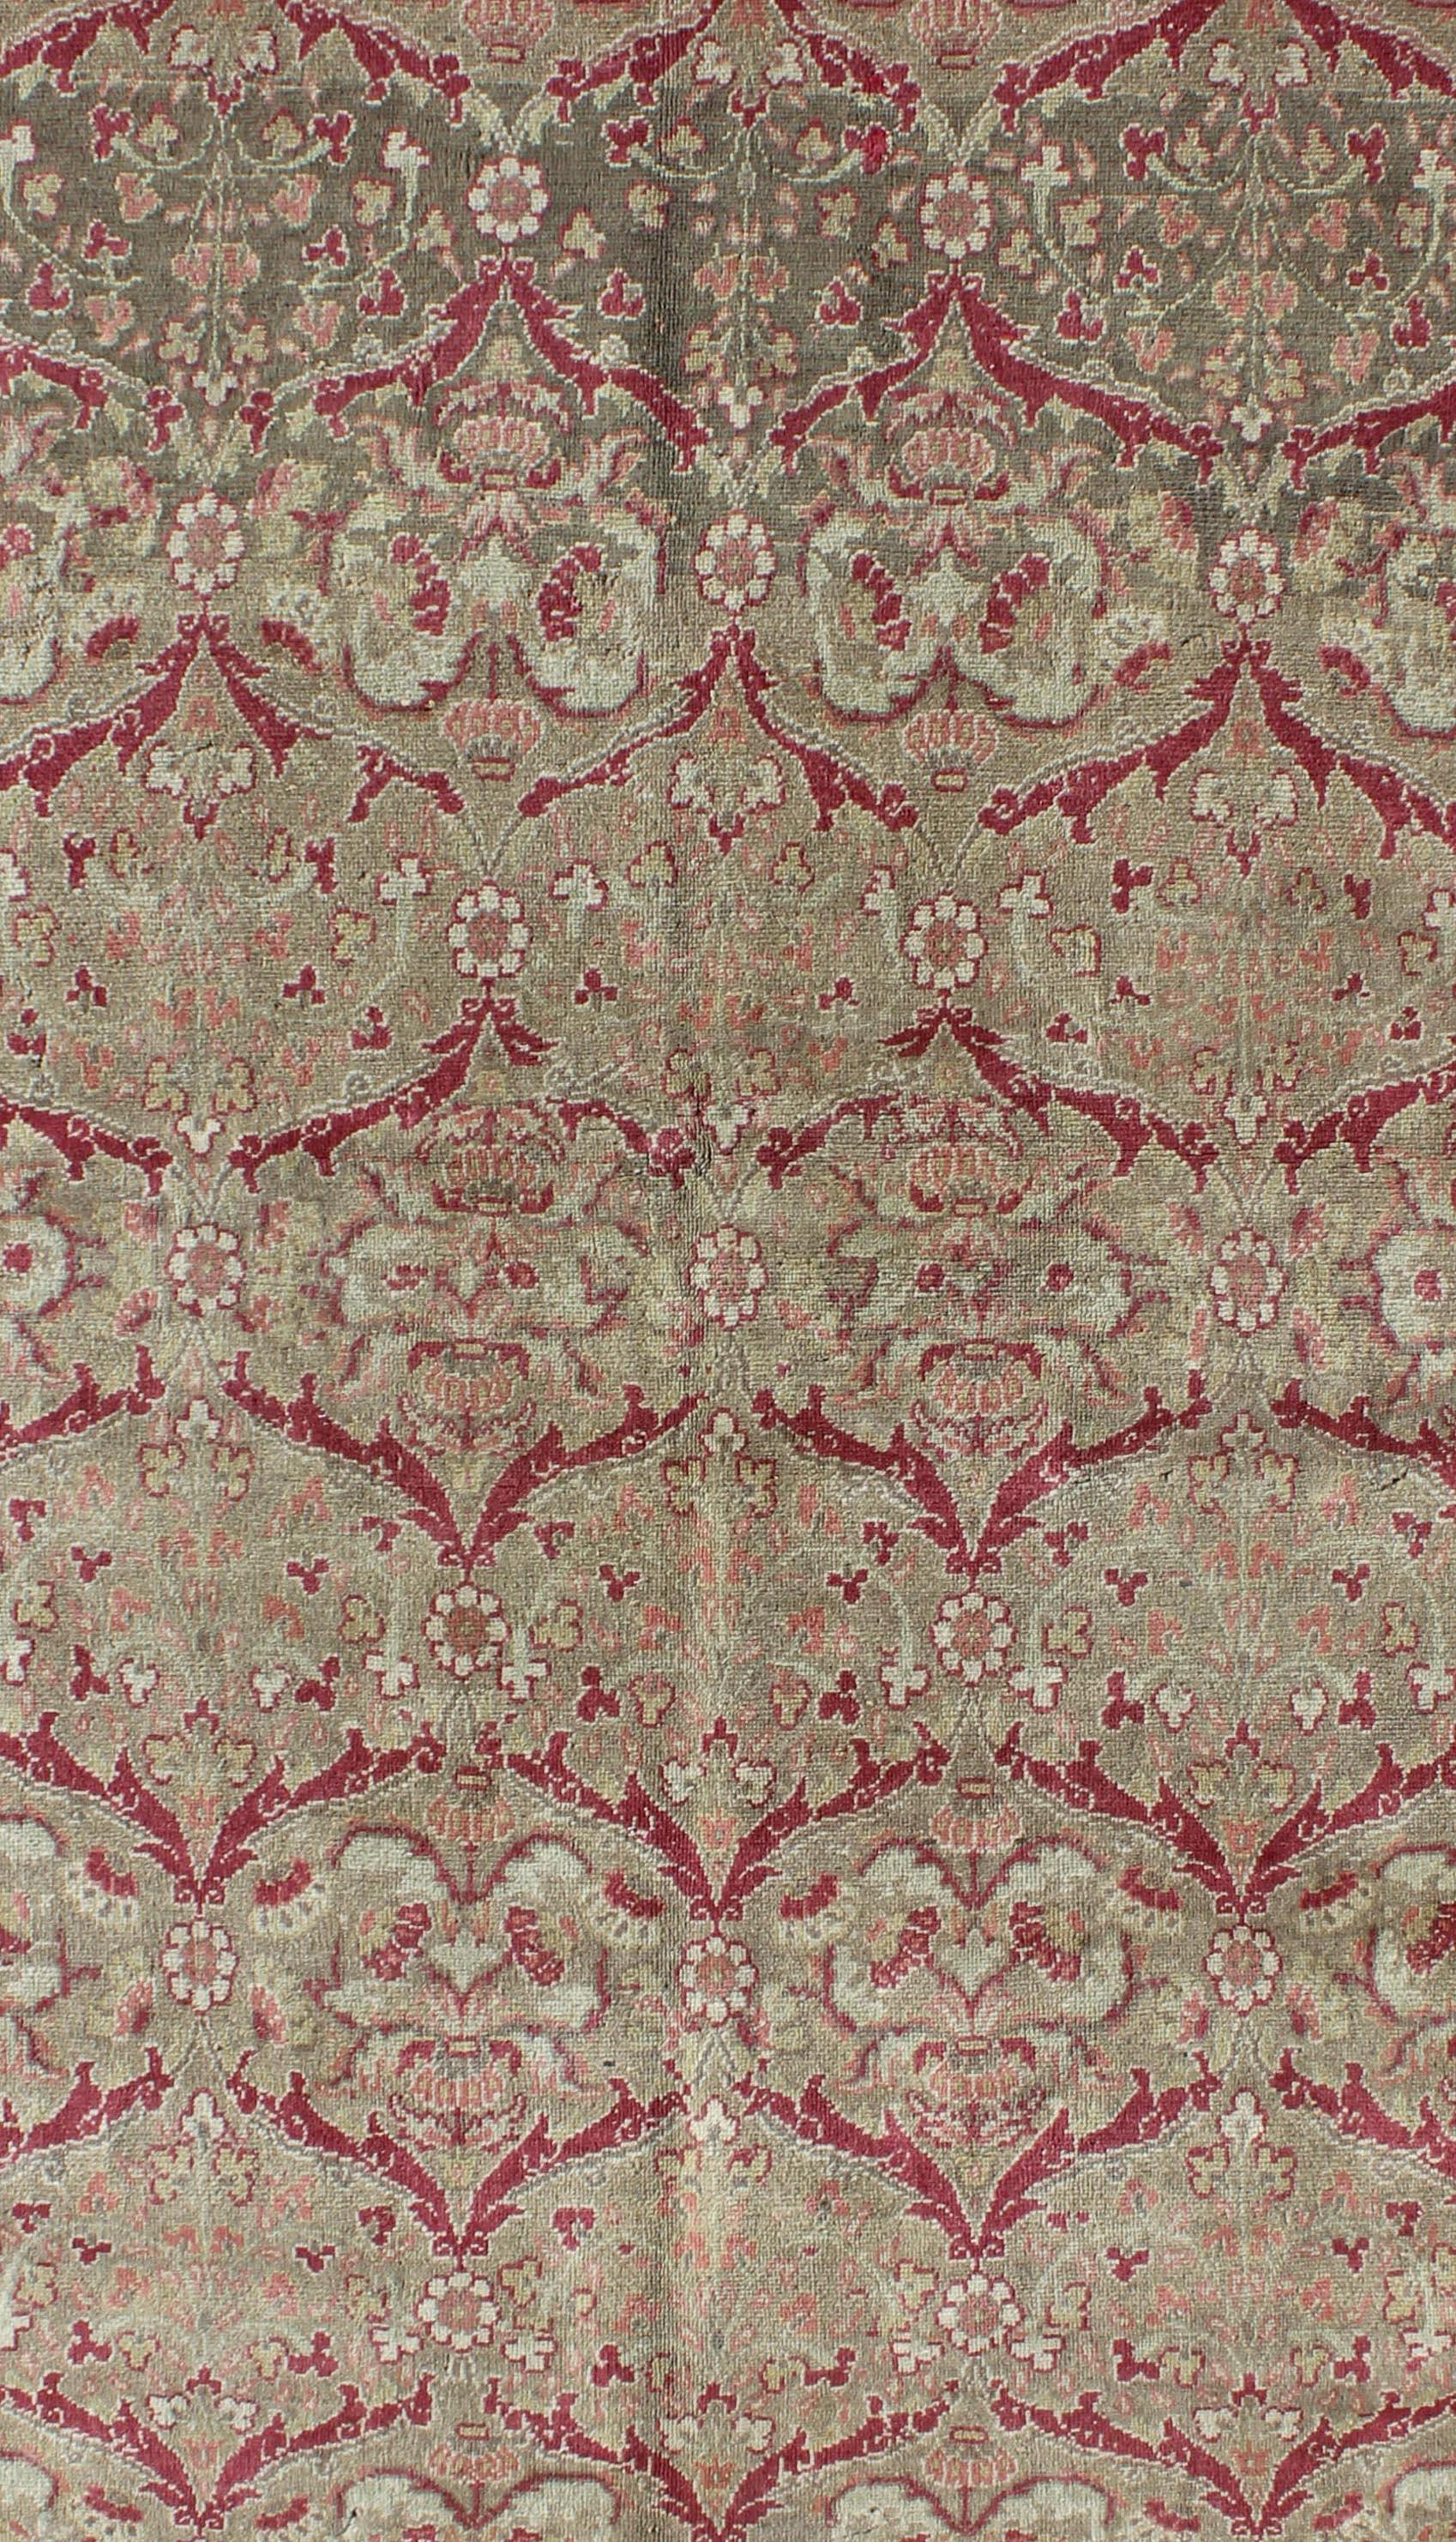 Measures: 5'0'' x 7'7''.

In this antique Sivas piece, a traditional all-over pattern is reinterpreted with a subtle arabesque aesthetic. Vinery, floral designs, and leaping blossom motifs are featured in a muted palette of taupe, red, and soft